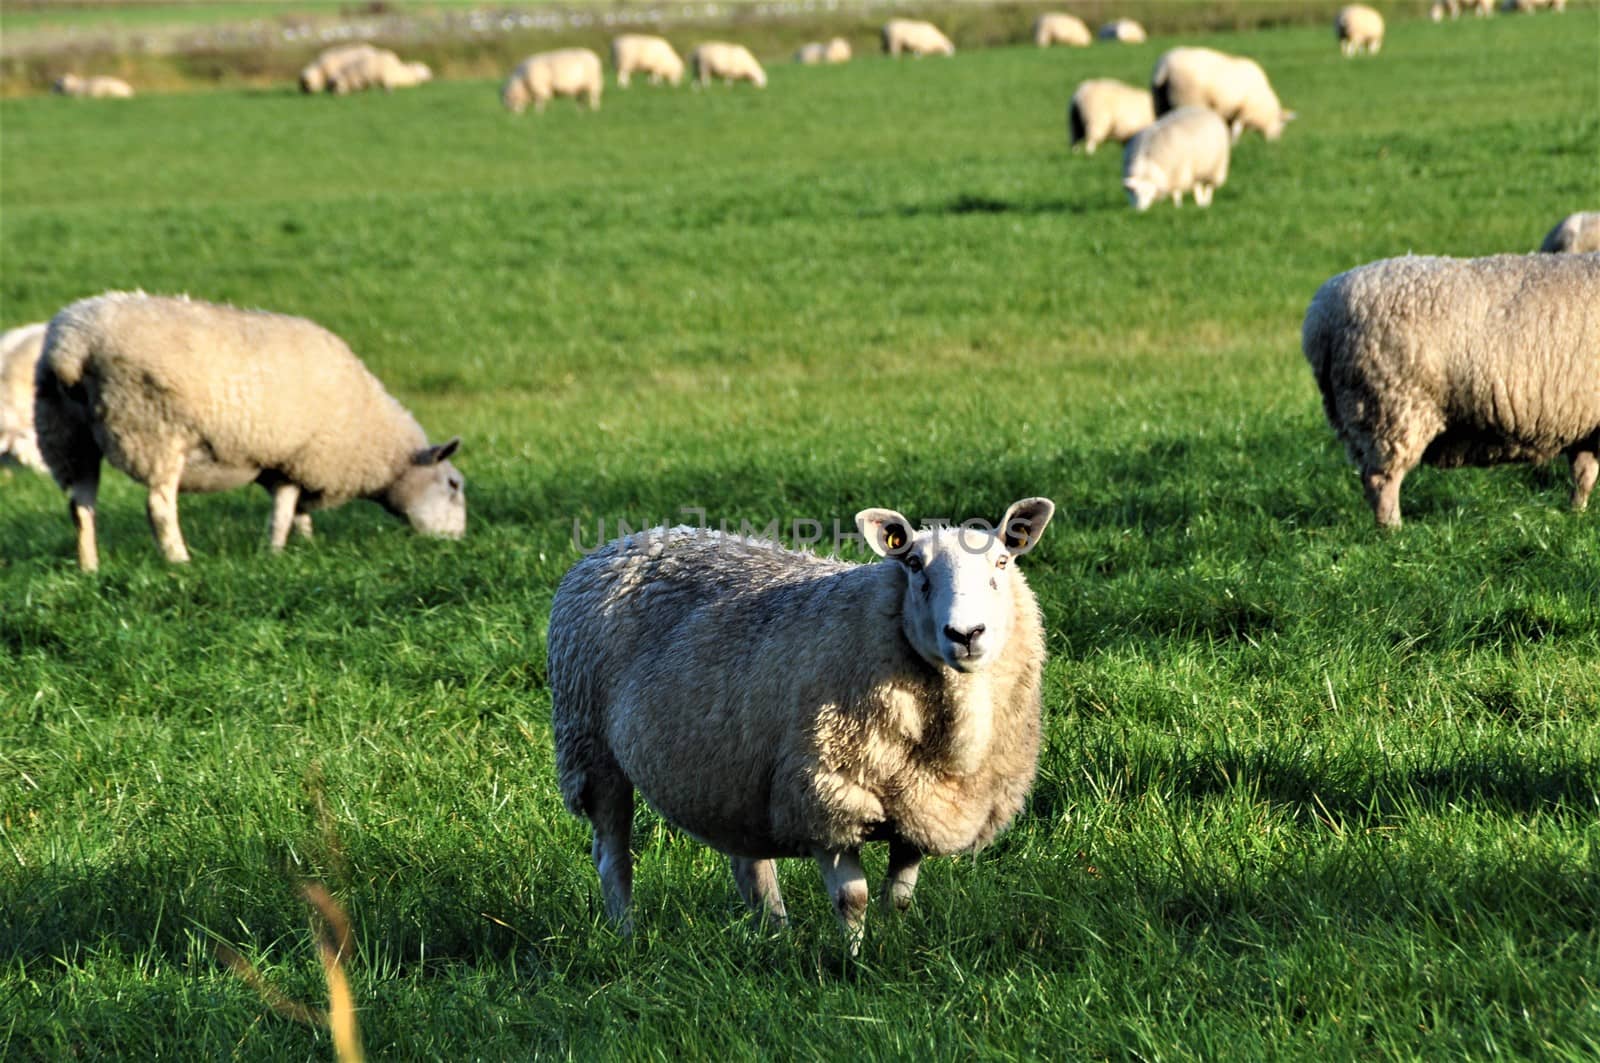 Some sheep on the pasture in northern germany